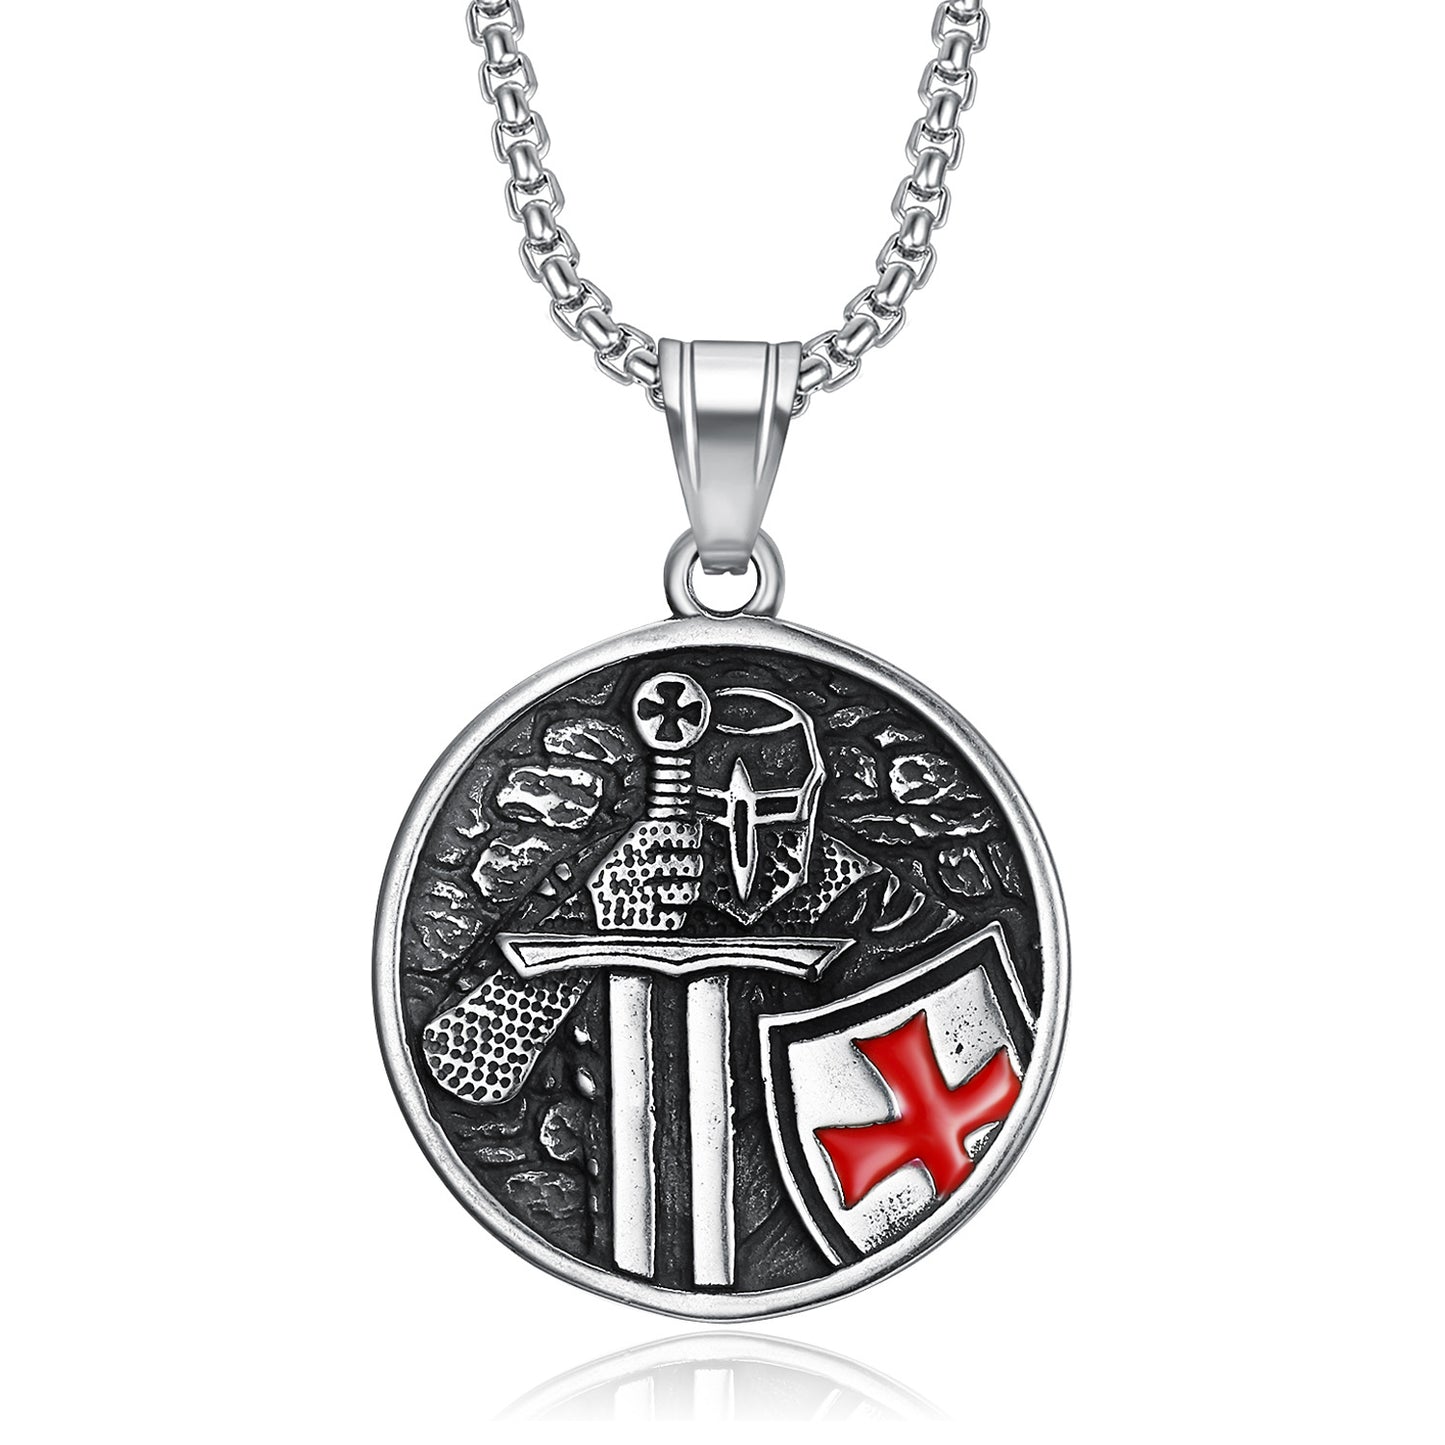 Goth Style Knights Templar Cross Shield Pendant With Necklace - Silver | GothReal